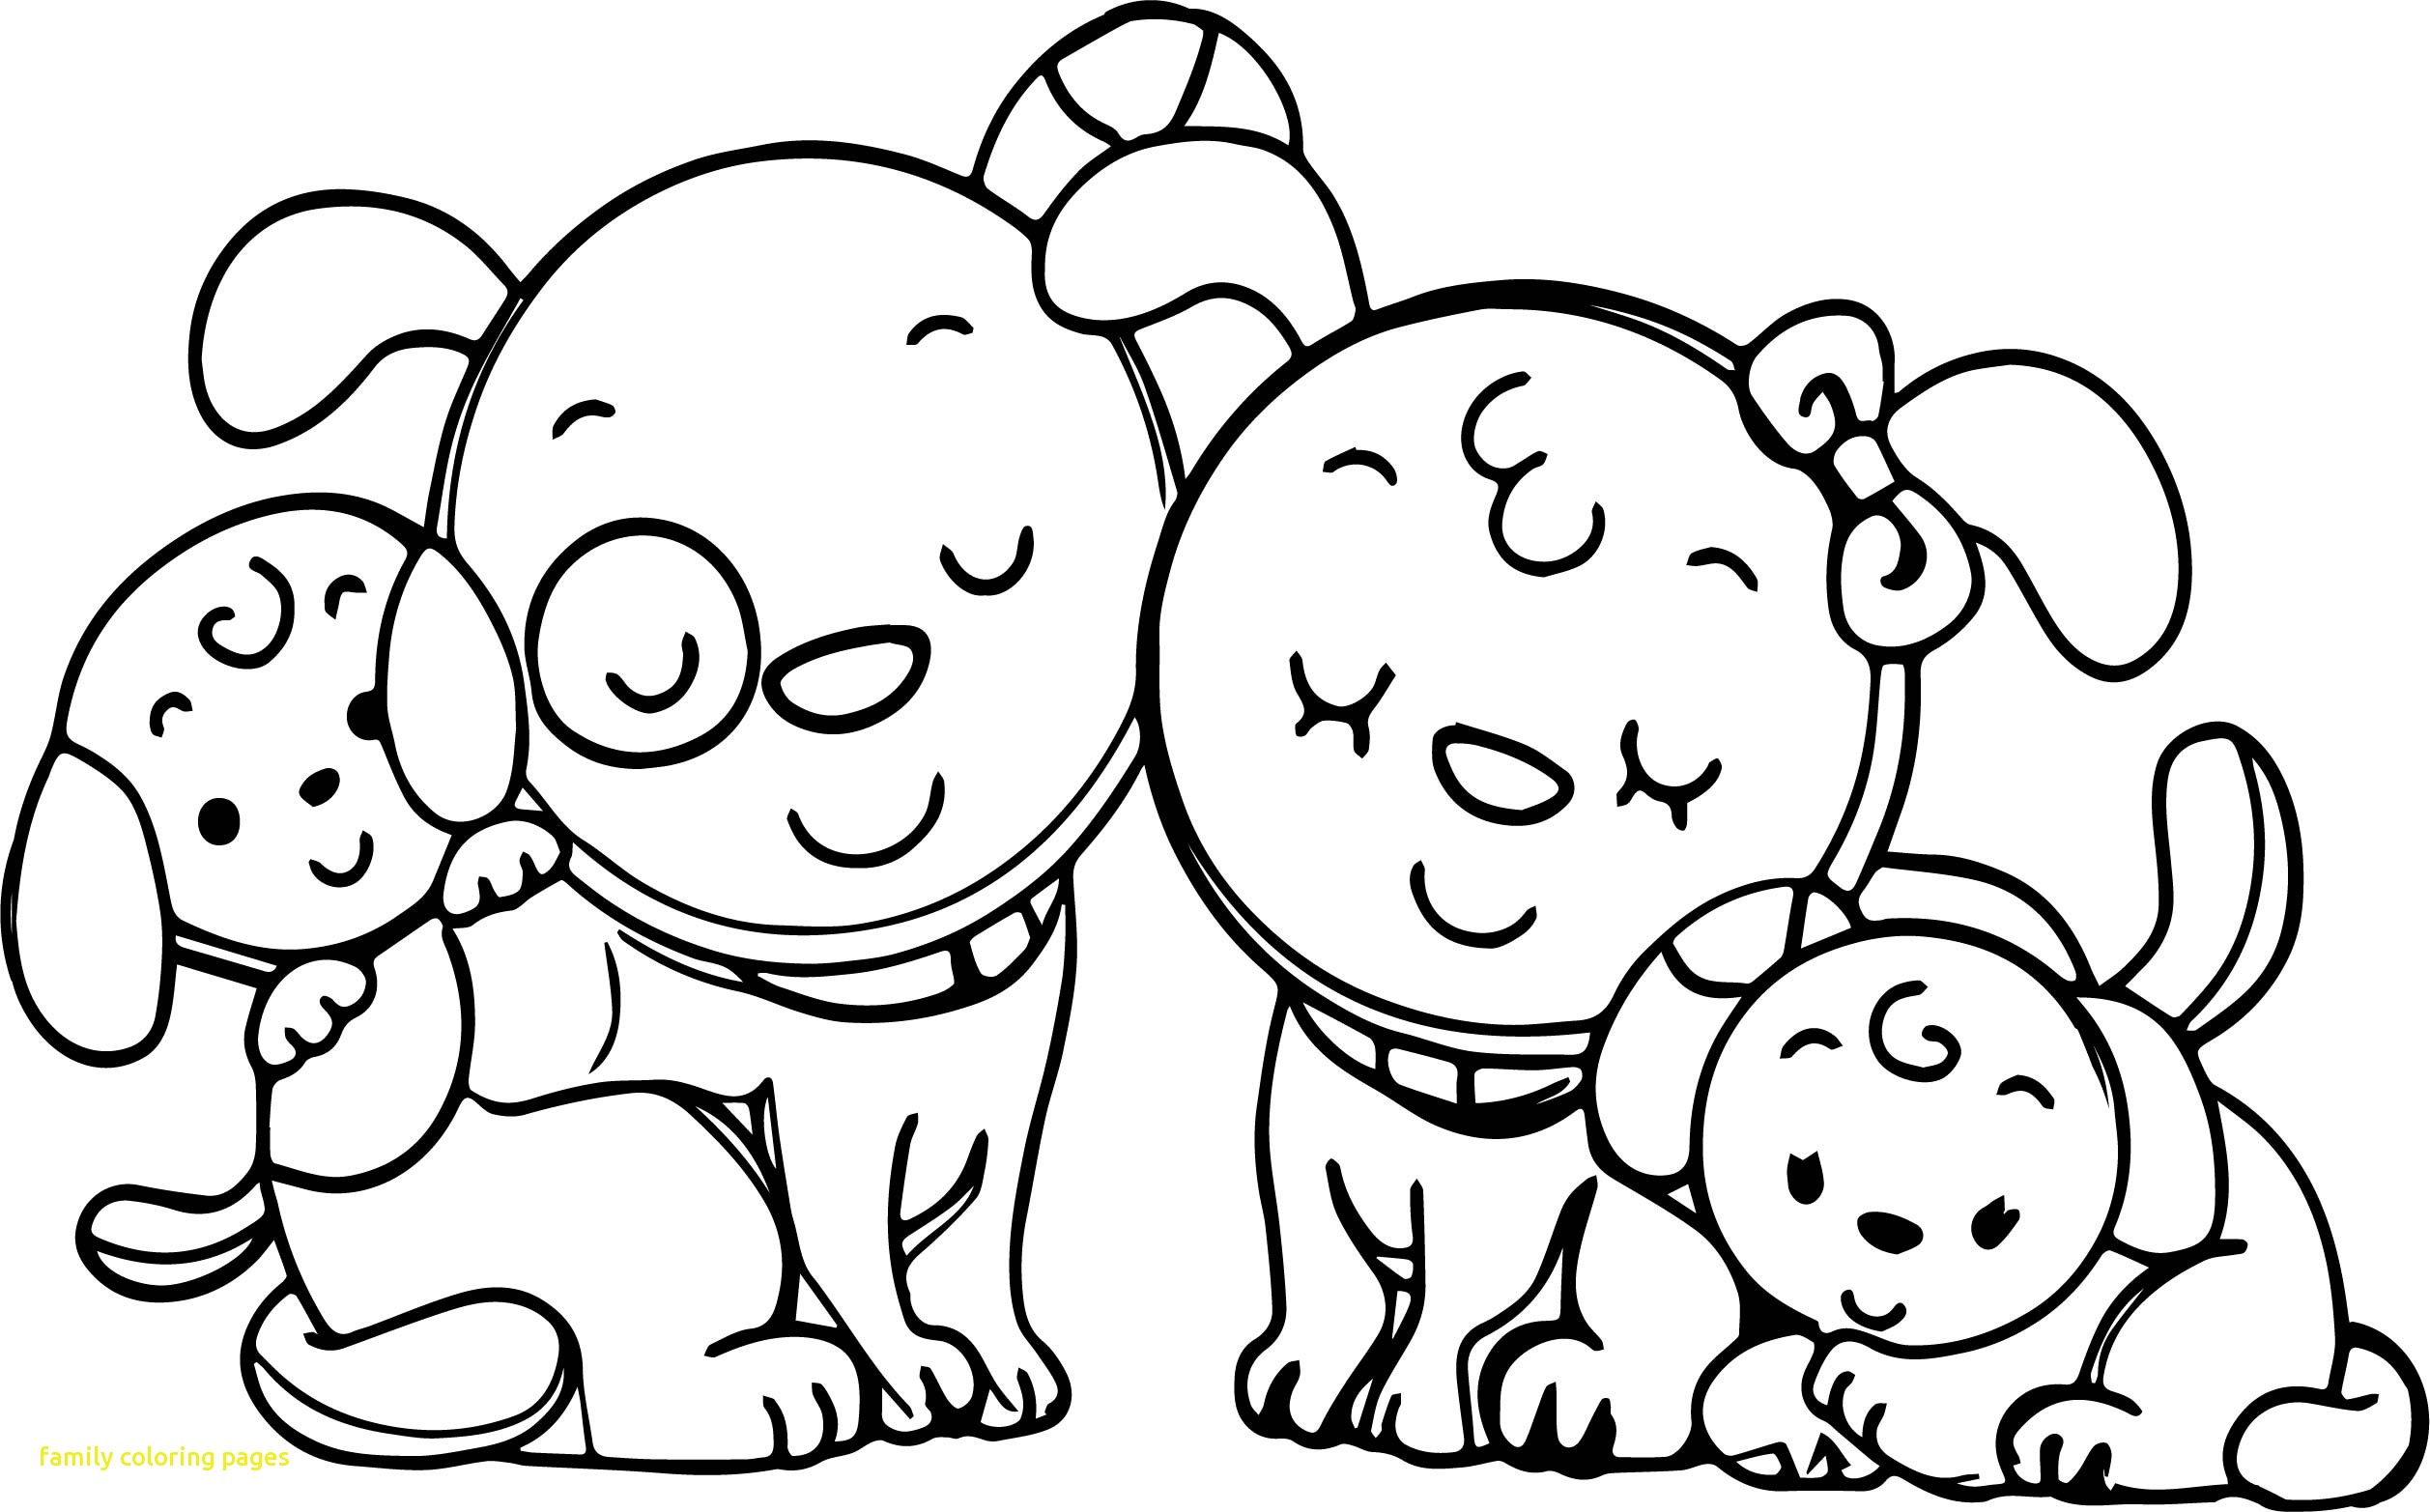 Family Coloring Pages For Preschoolers at GetColorings.com | Free